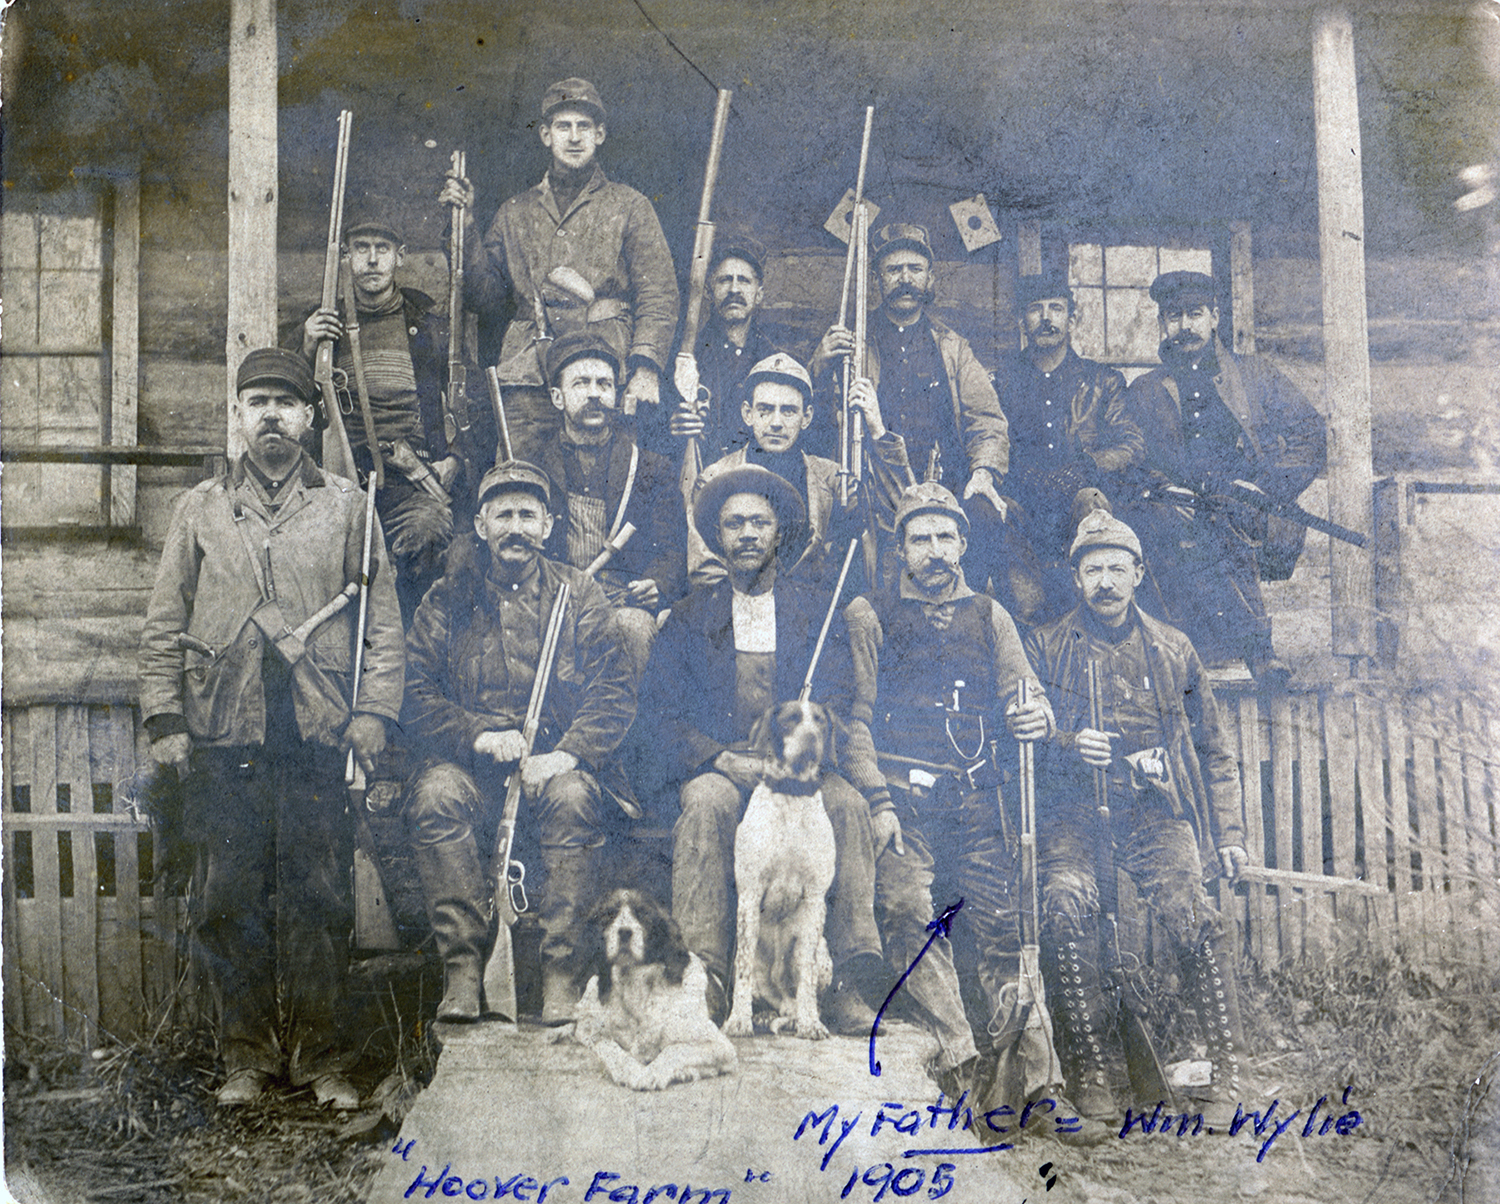 William Wylie and fellow hunters pose at Hoover Farm in Elk County, 1905. Margaret Pearson Bothwell Collection, MFF 2275, Detre Library & Archives, Heinz History Center.